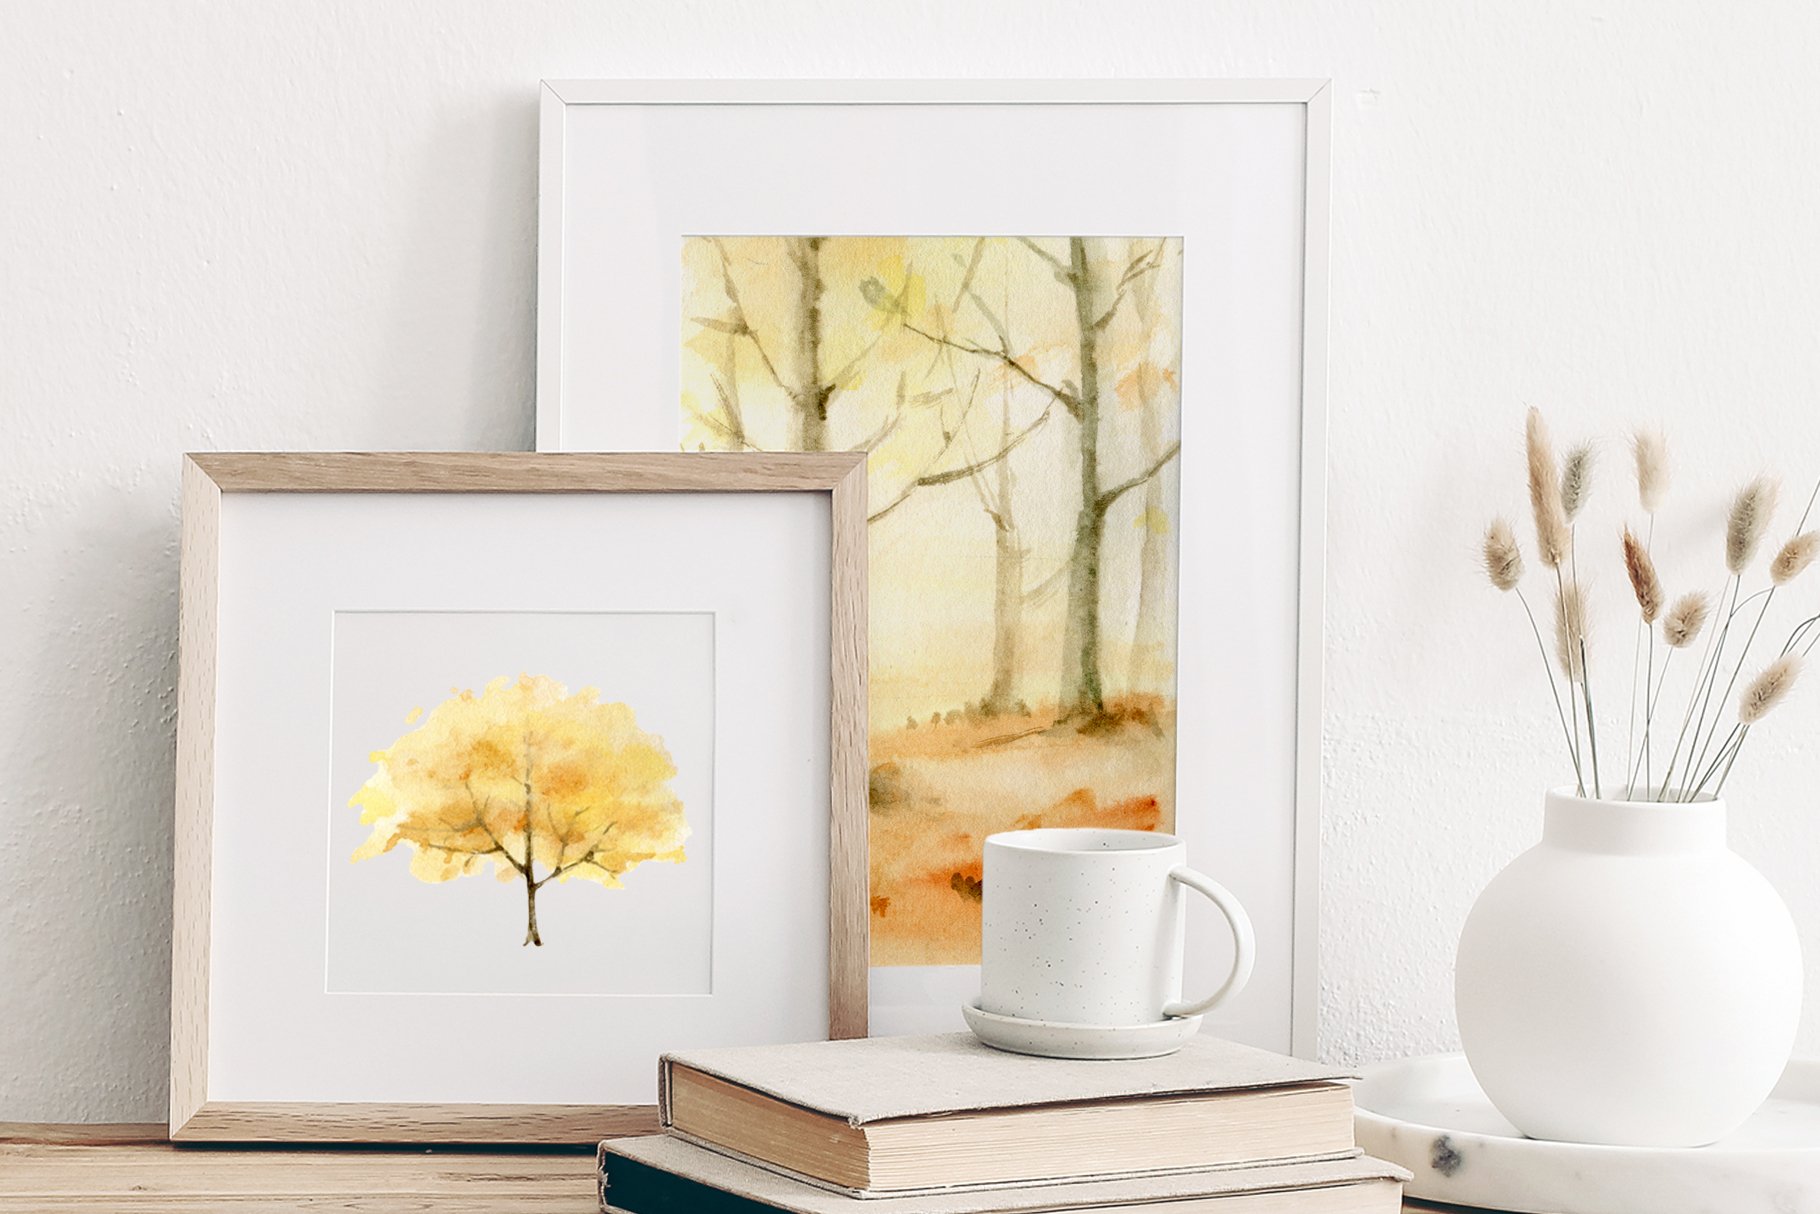 Painting of a yellow tree next to a cup of coffee.